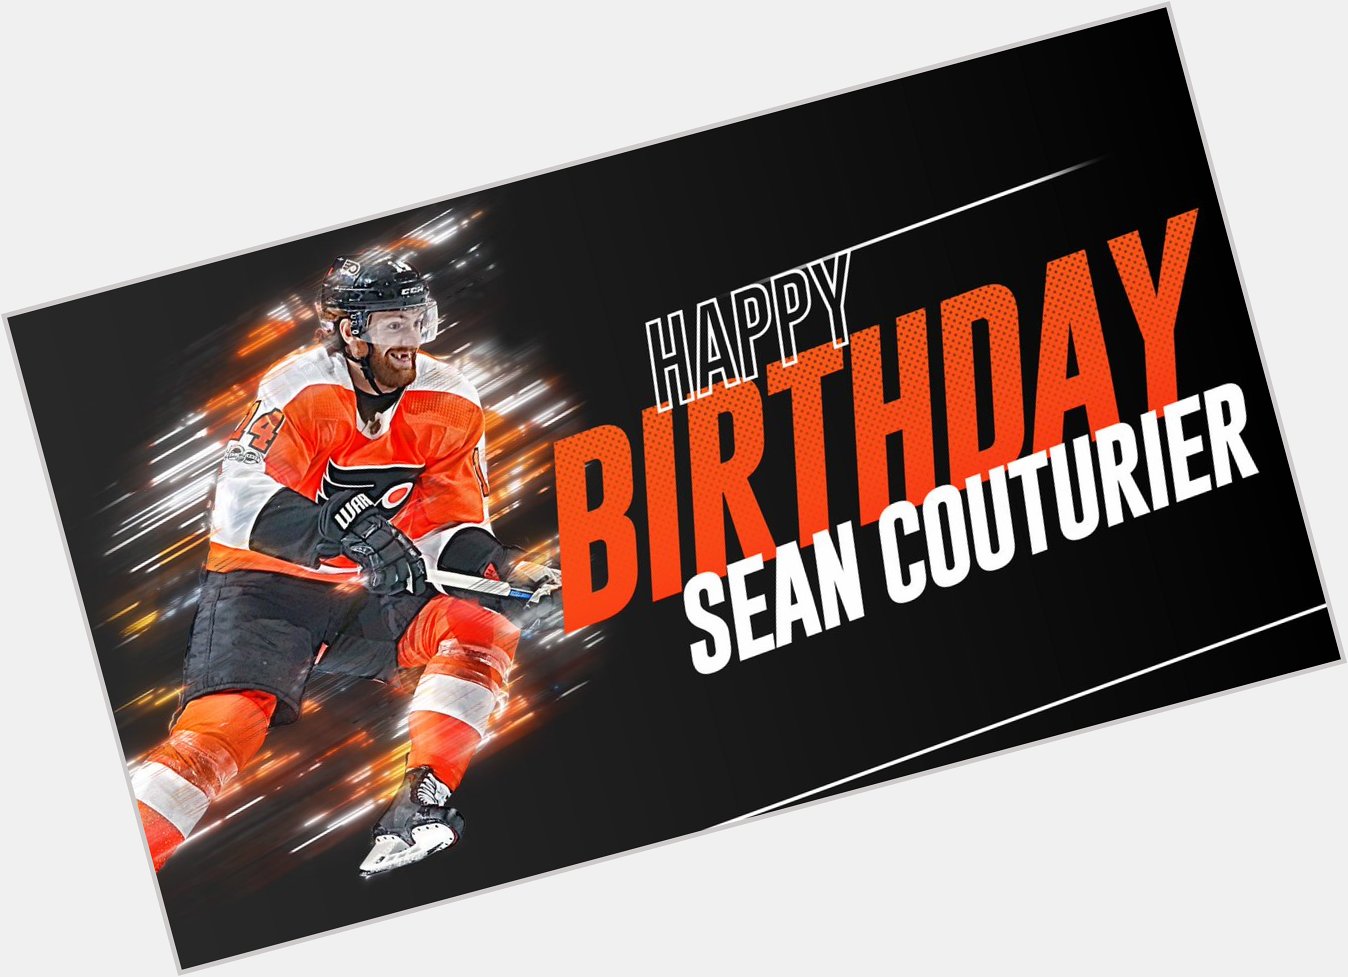 Join us in wishing Sean Couturier a very Happy Birthday!  